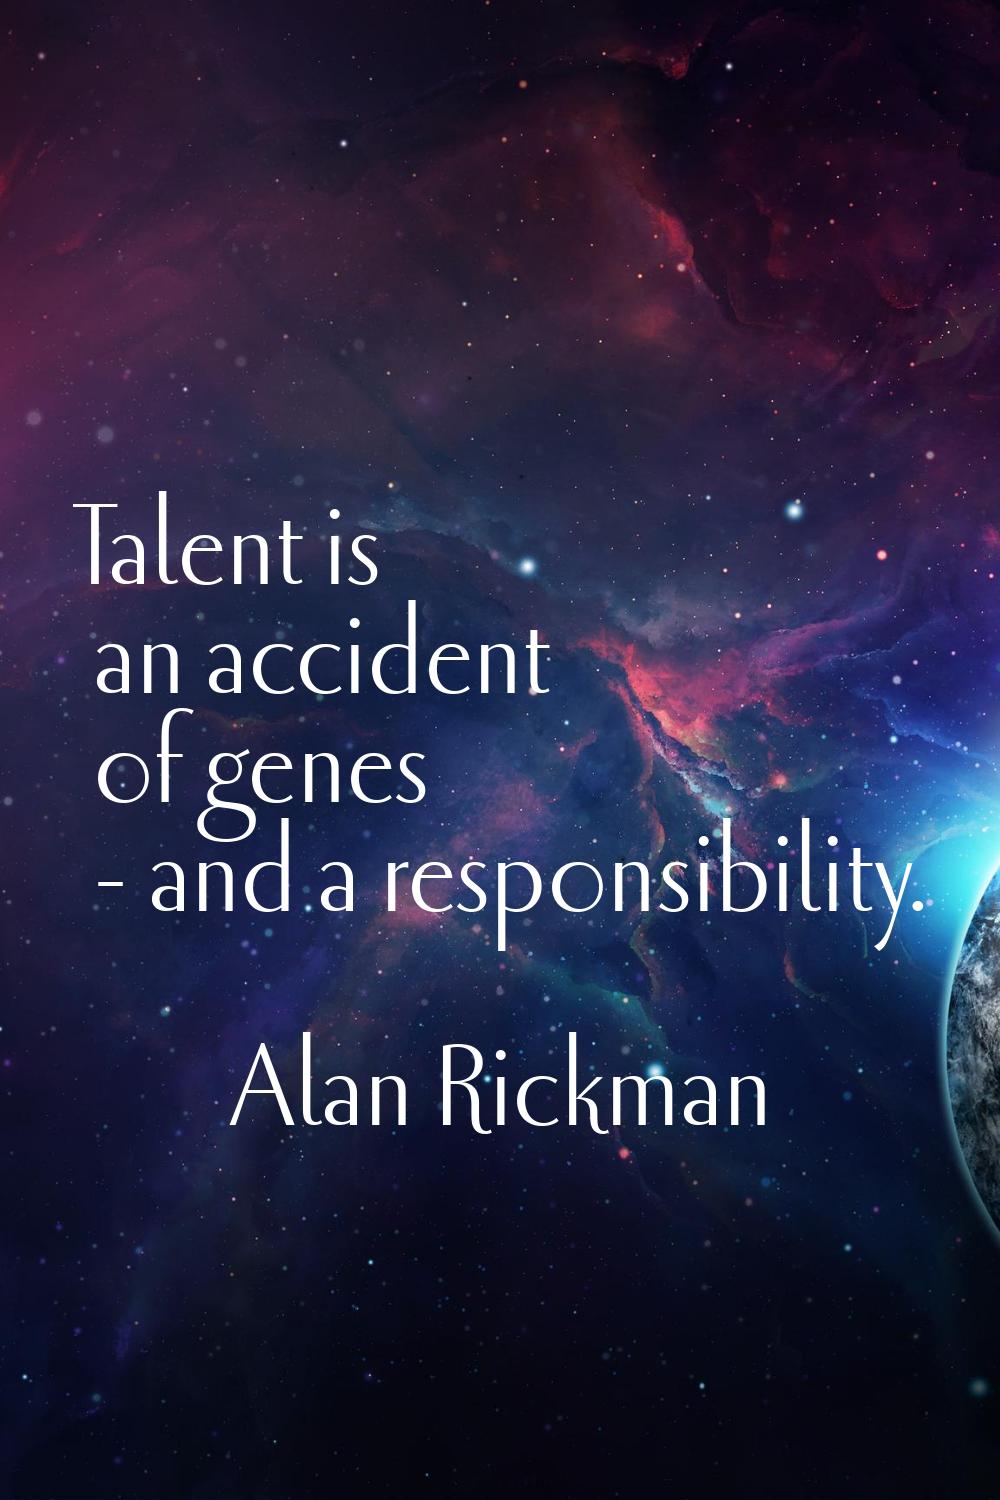 Talent is an accident of genes - and a responsibility.